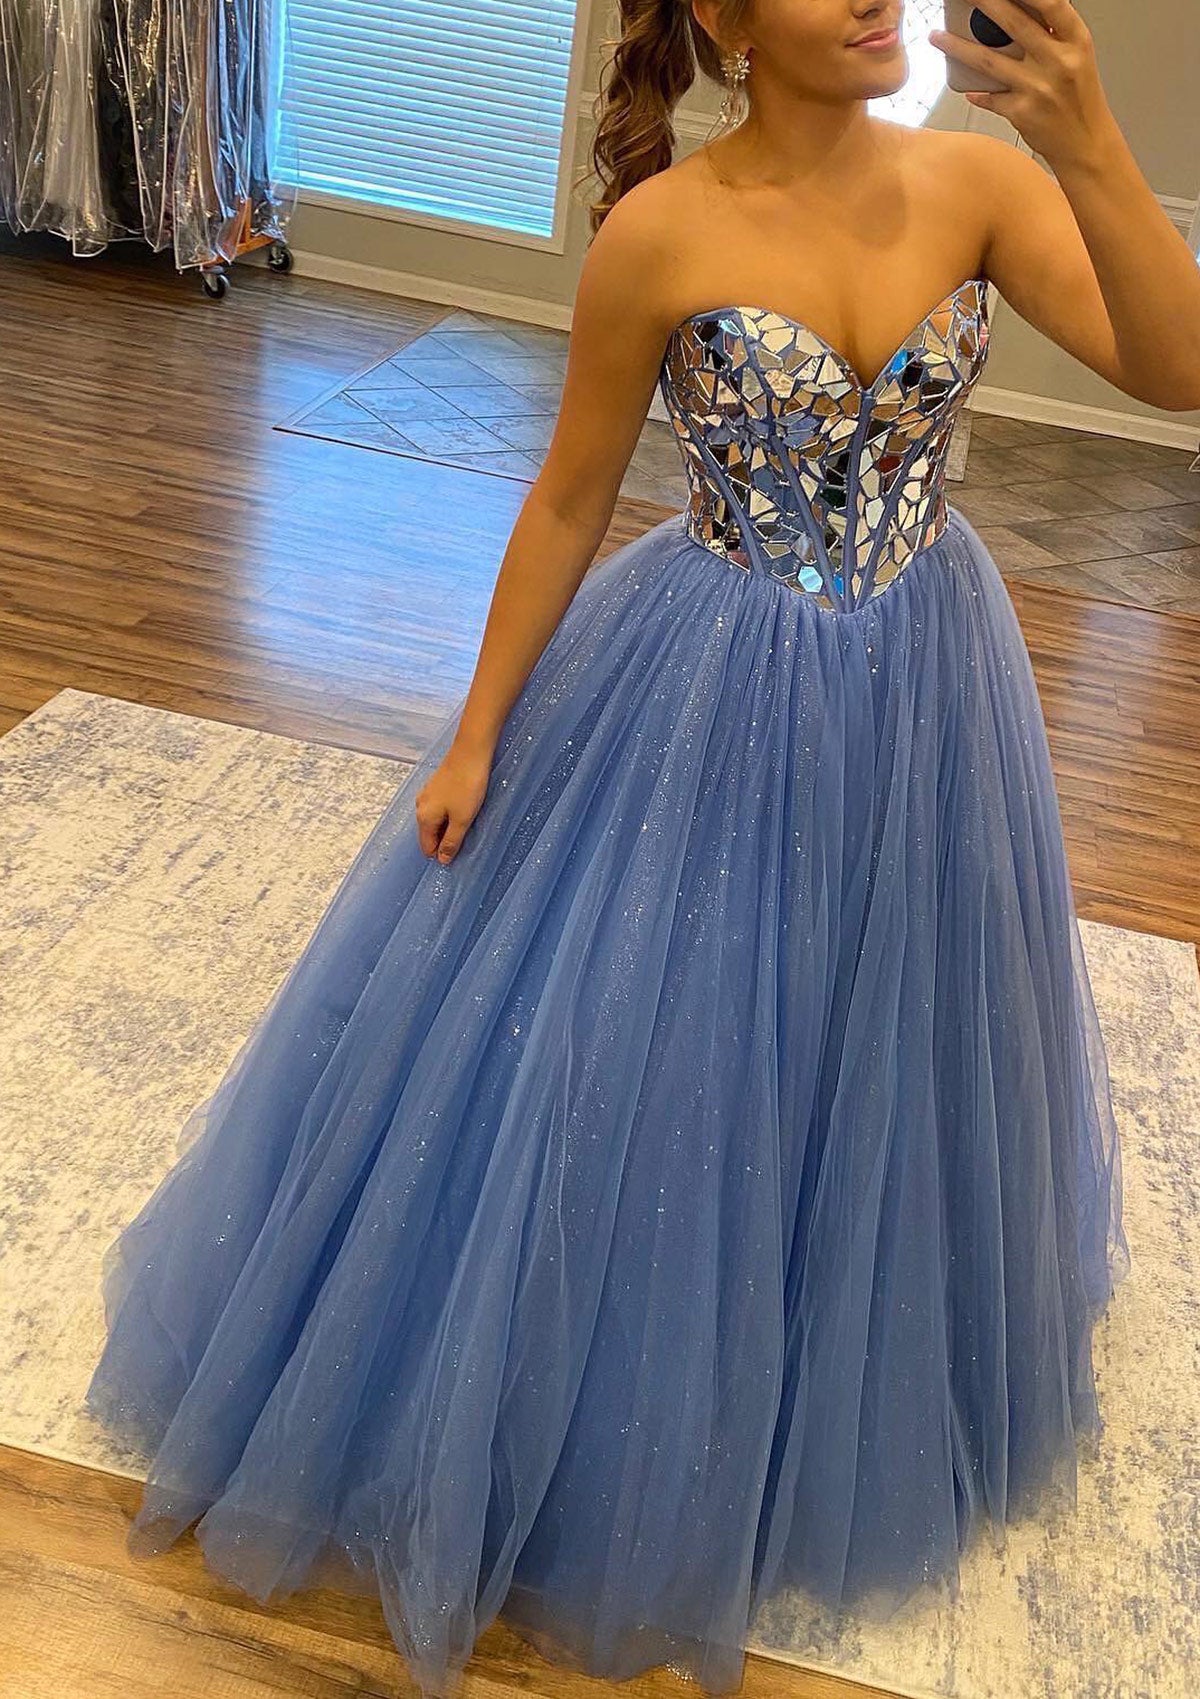 Sweetheart Blue Tulle Ball Gown Sleeveless Prom Dress